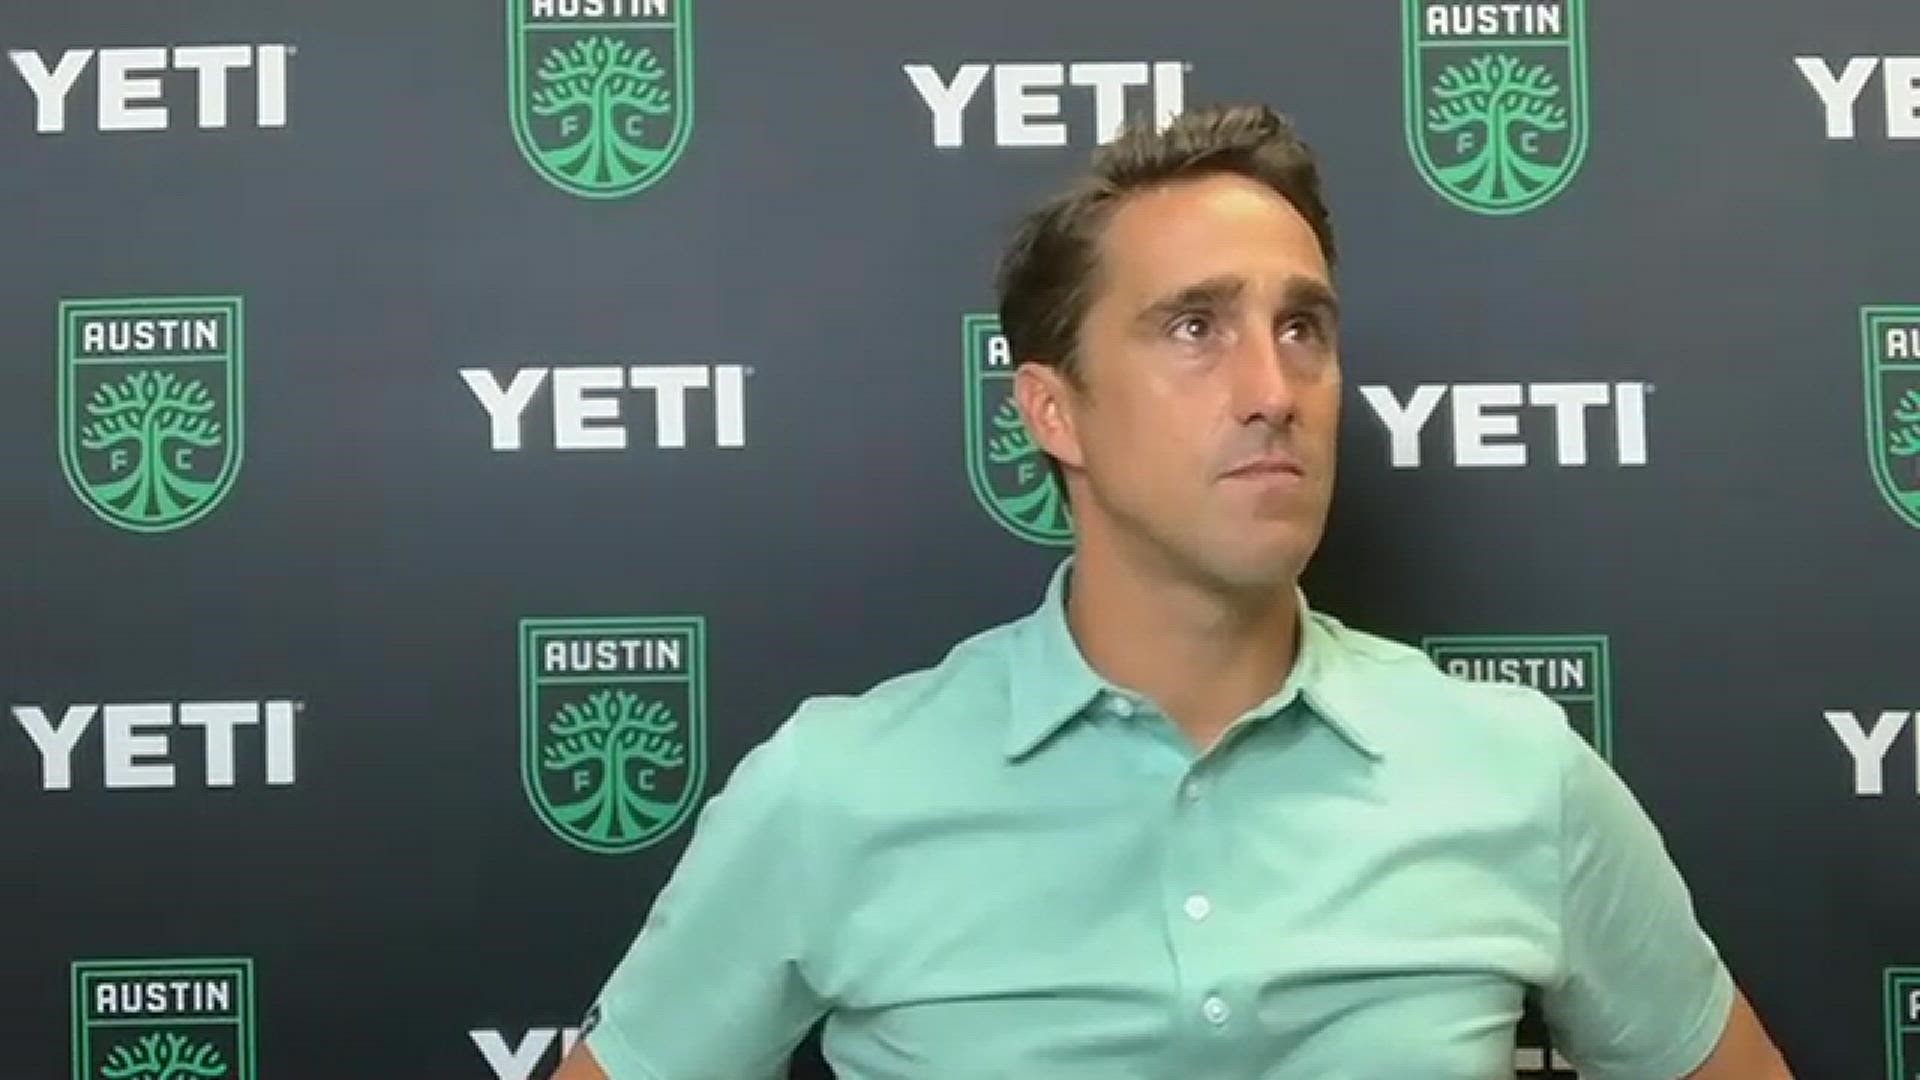 Austin FC head coach Josh Wolff speaks to the media after the club's 2-1 loss to Vancouver Whitecaps.